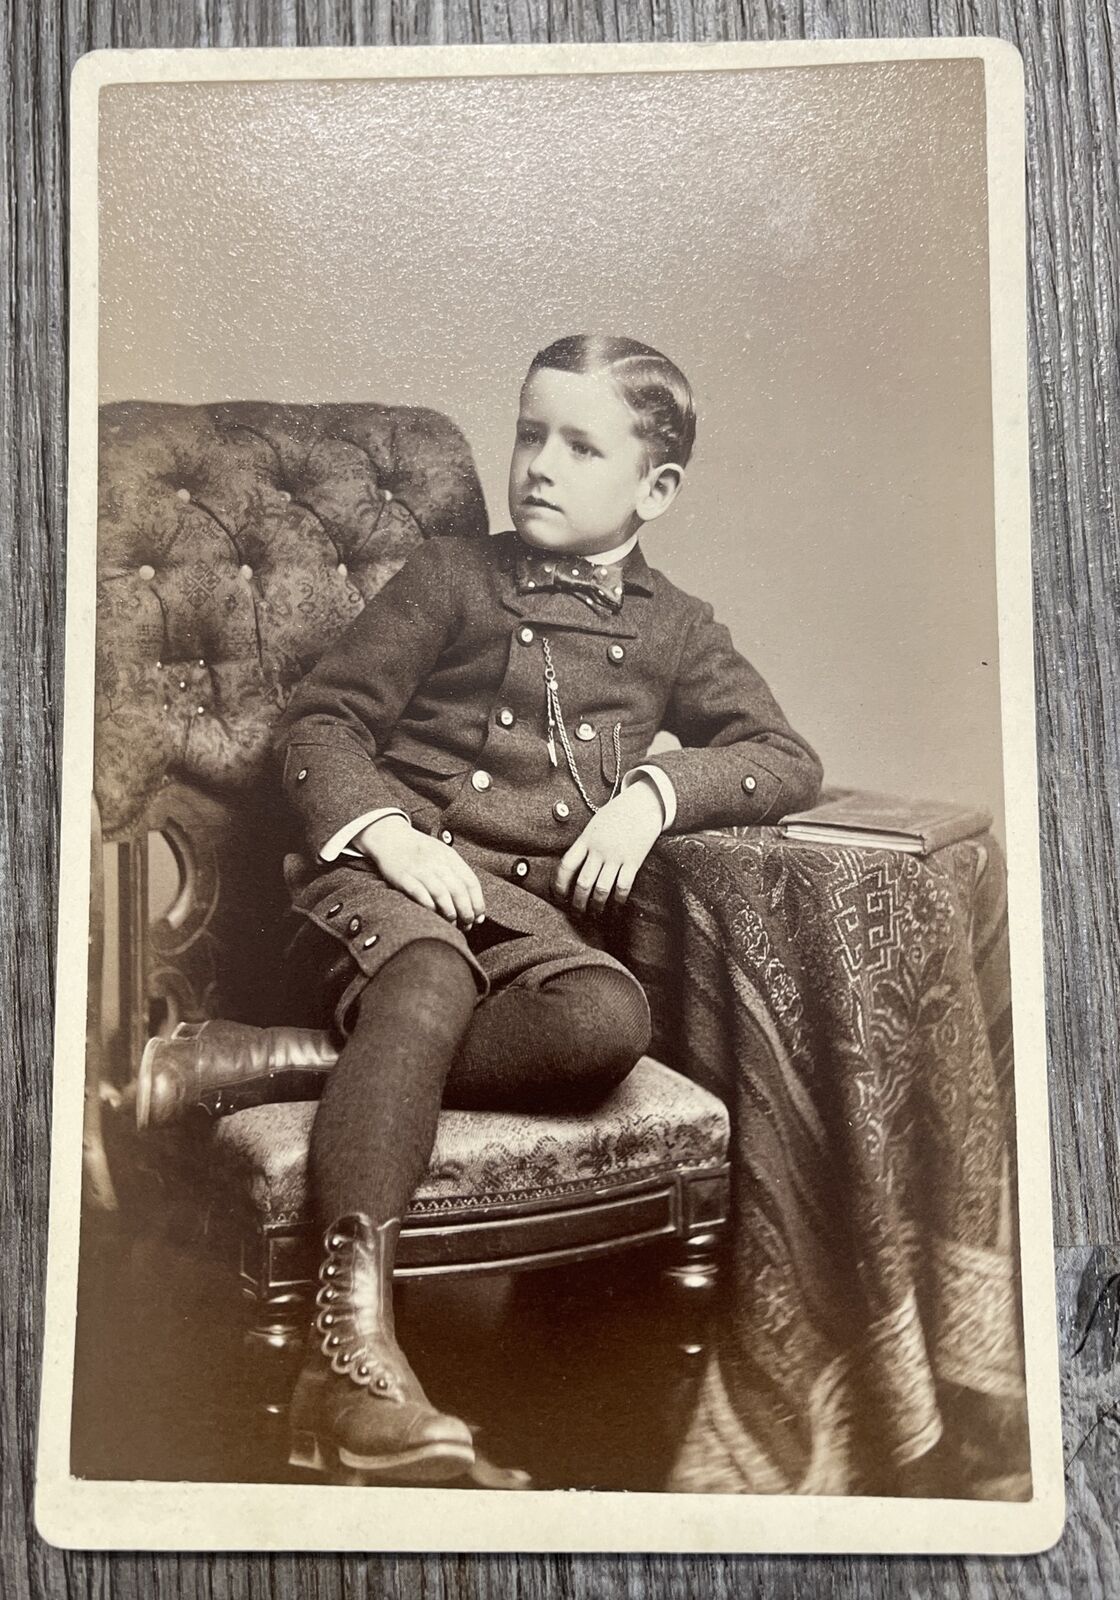 Antique Cabinet Card Photo Of A Cute Young Boy Well Dressed - Towanda, PA 